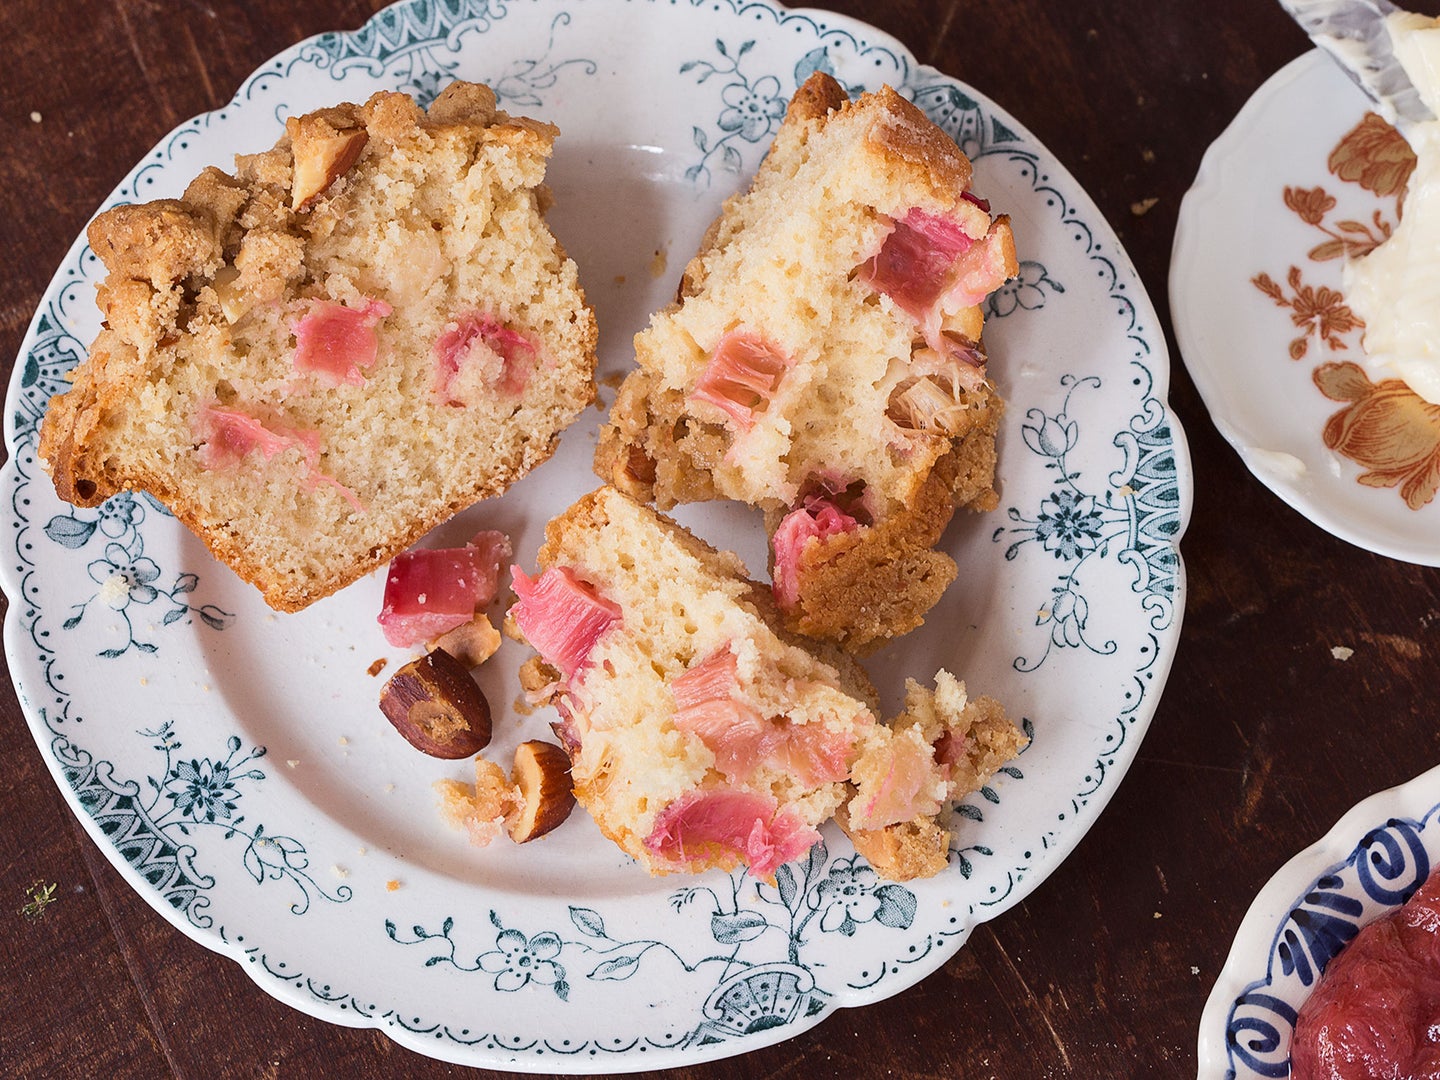 RHUBARB MUFFINS WITH ALMOND STREUSEL